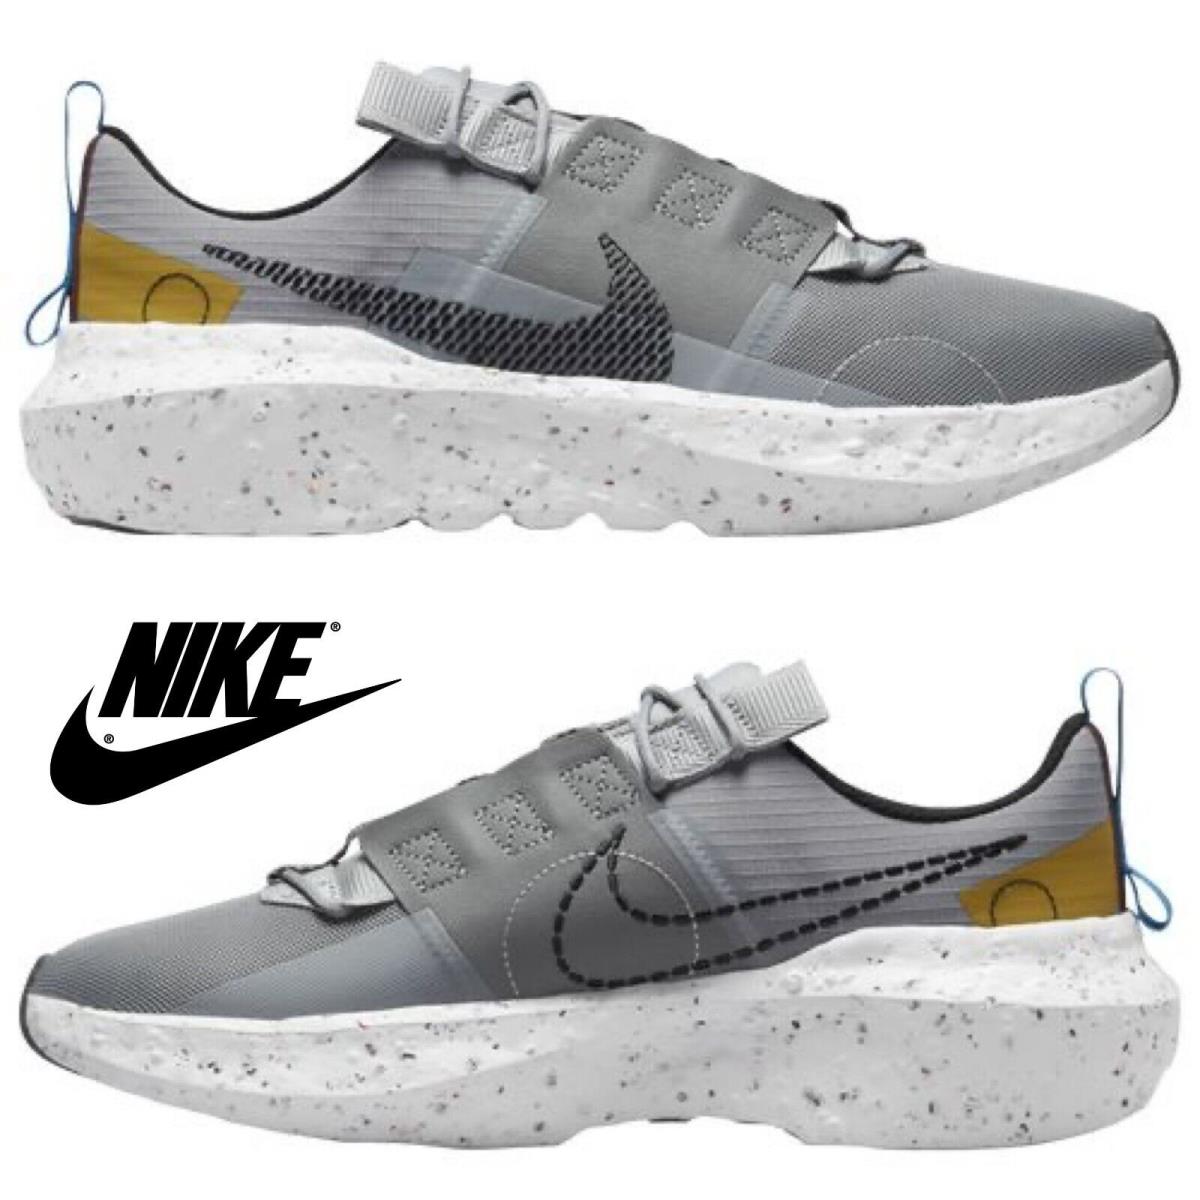 Nike Men`s Crater Impact Sneakers Training Athletic Sport Casual Shoes Gray